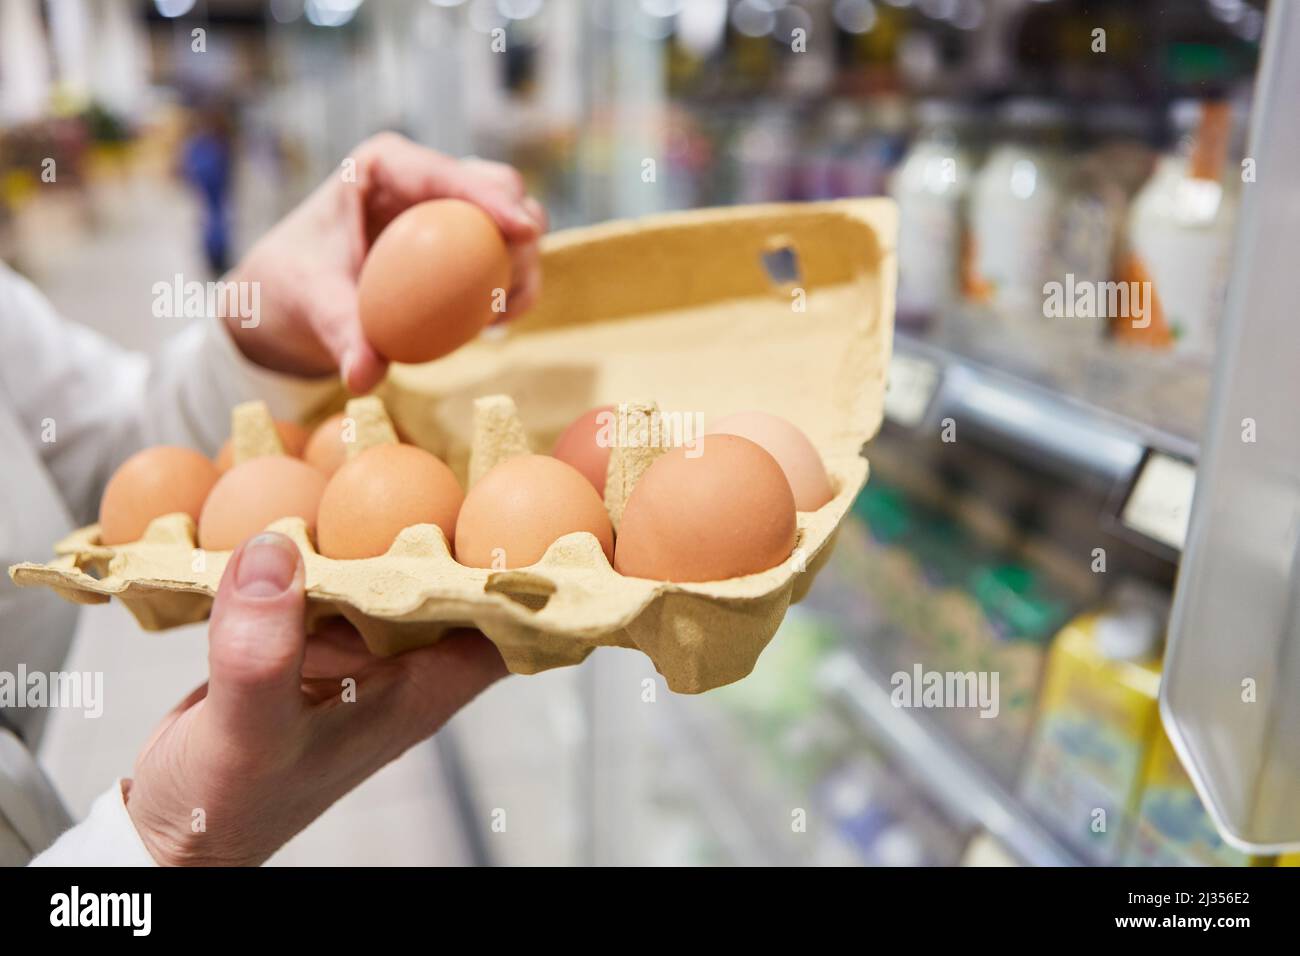 Hand of a customer holding carton of fresh organic eggs while shopping in supermarket Stock Photo